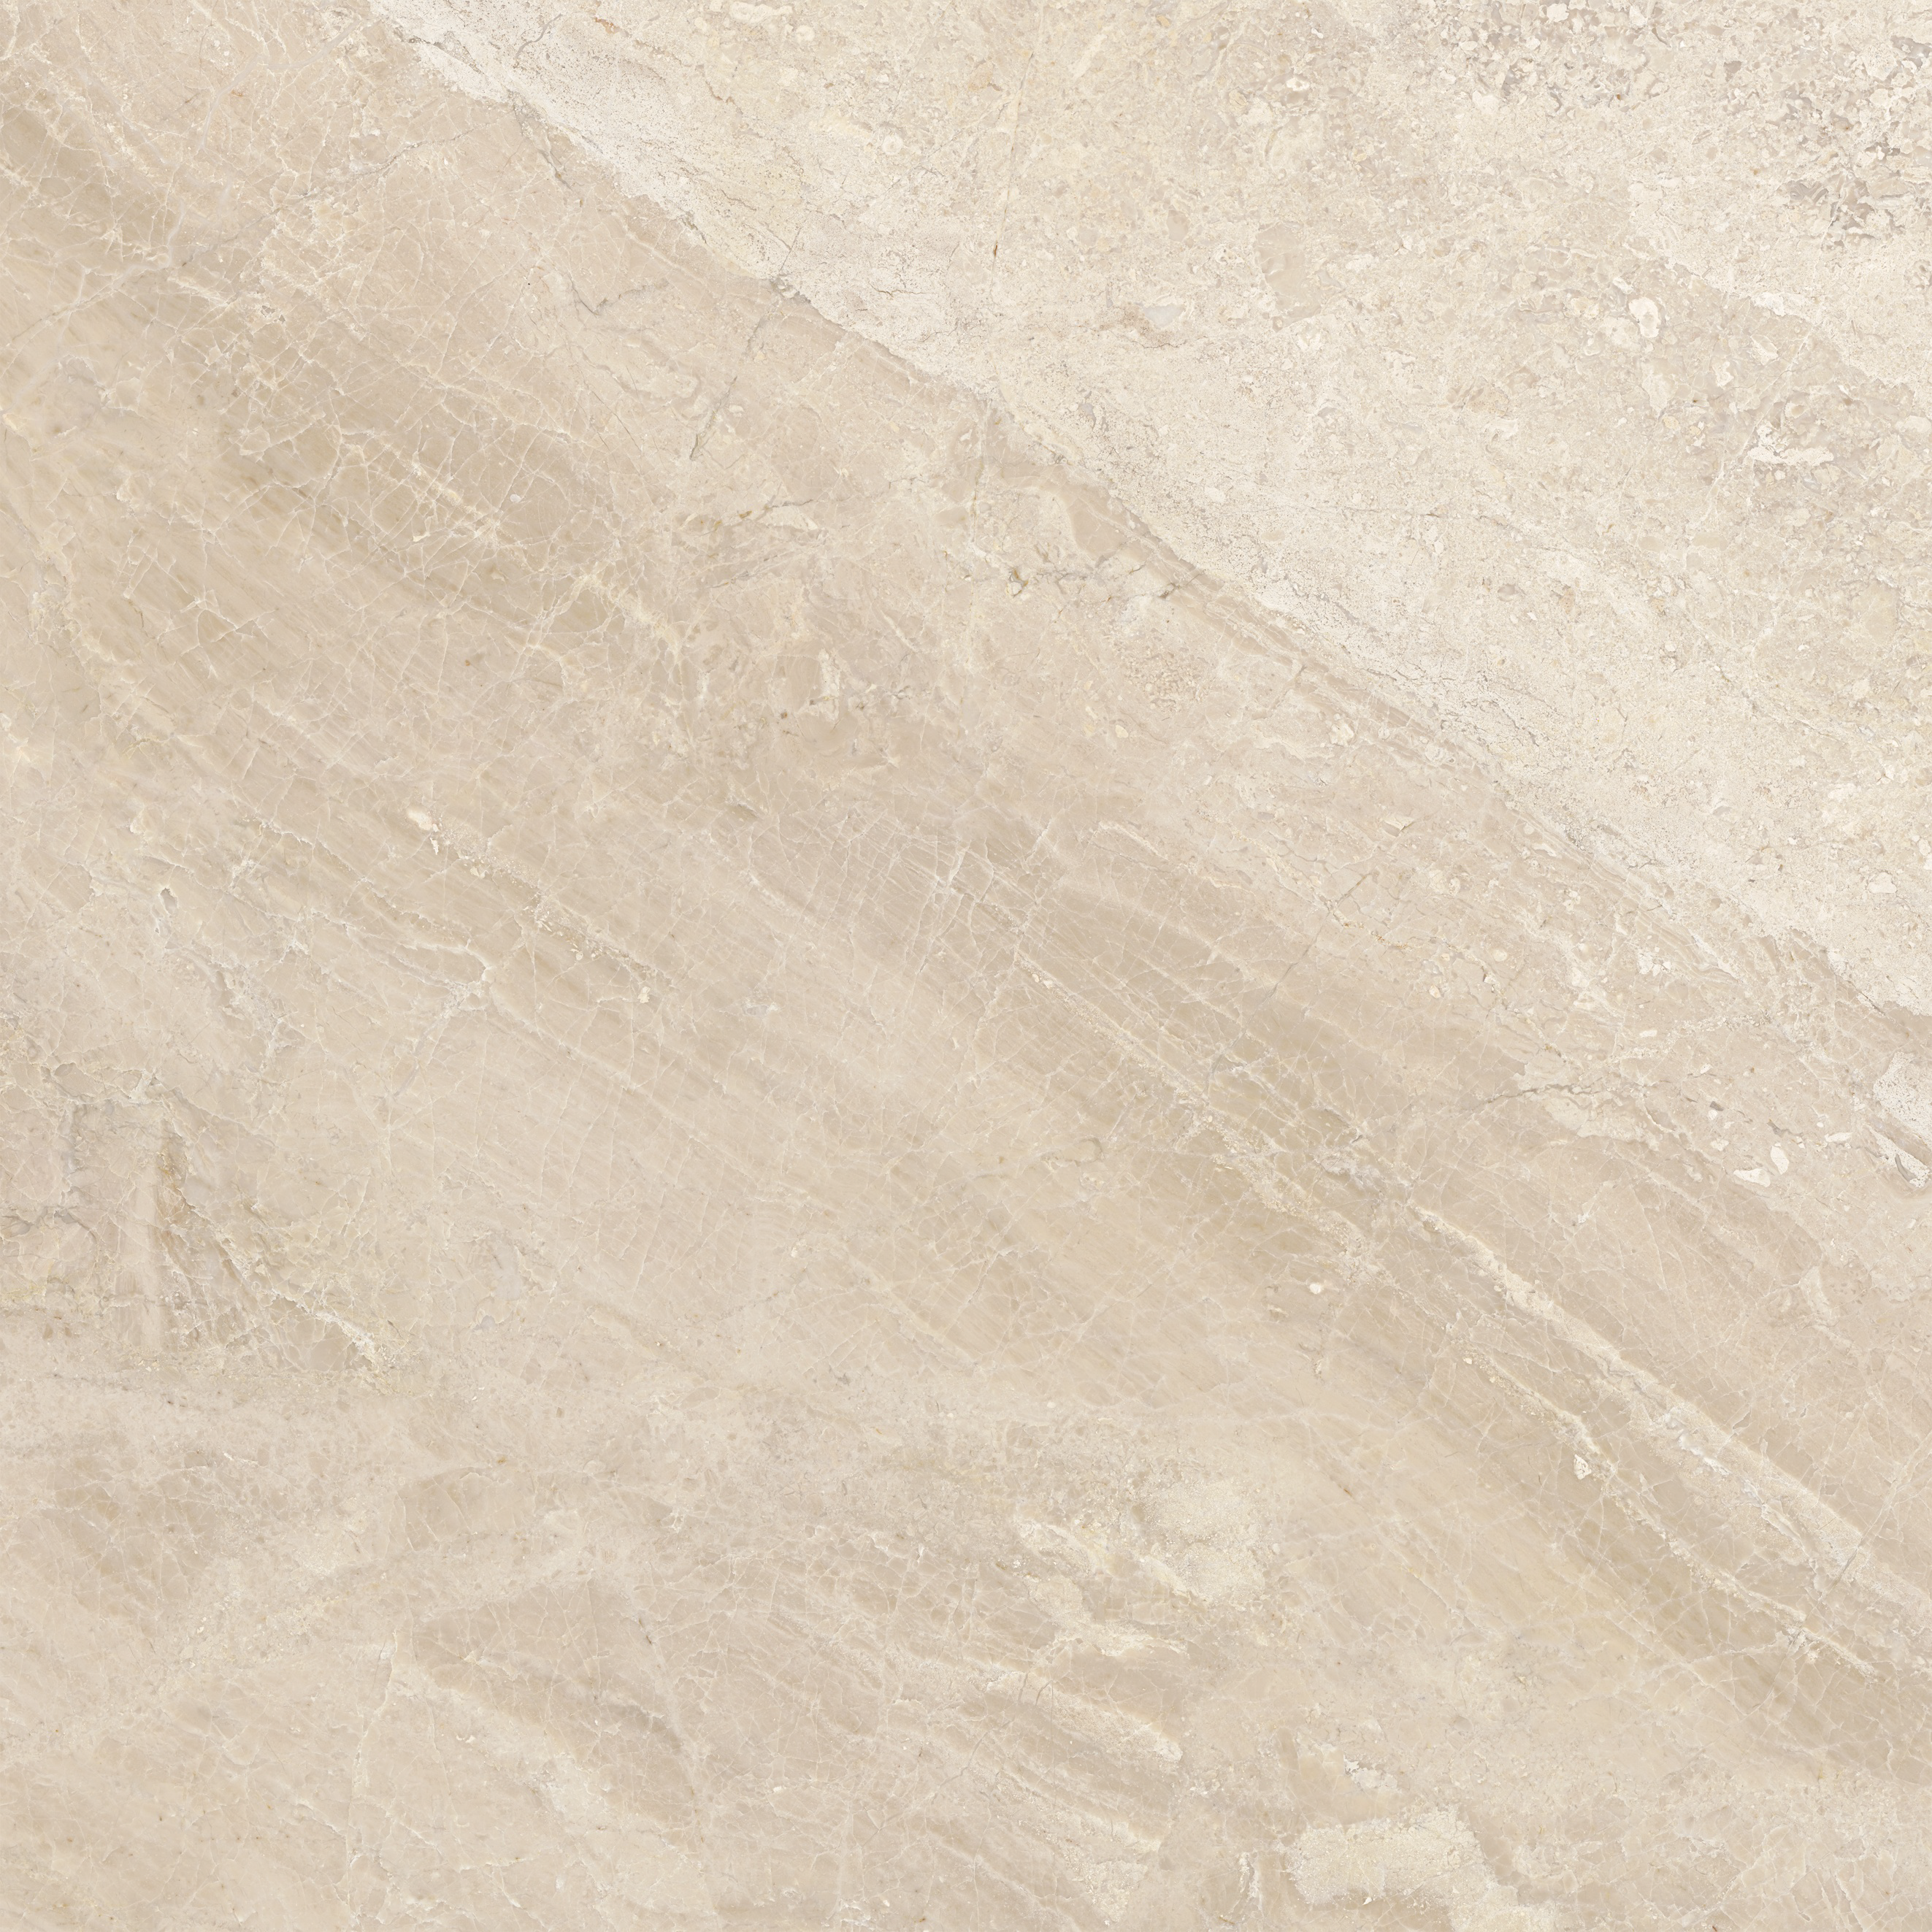 marble pattern natural stone field tile from impero reale anatolia collection distributed by surface group international honed finish straight edge edge 24x24 square shape